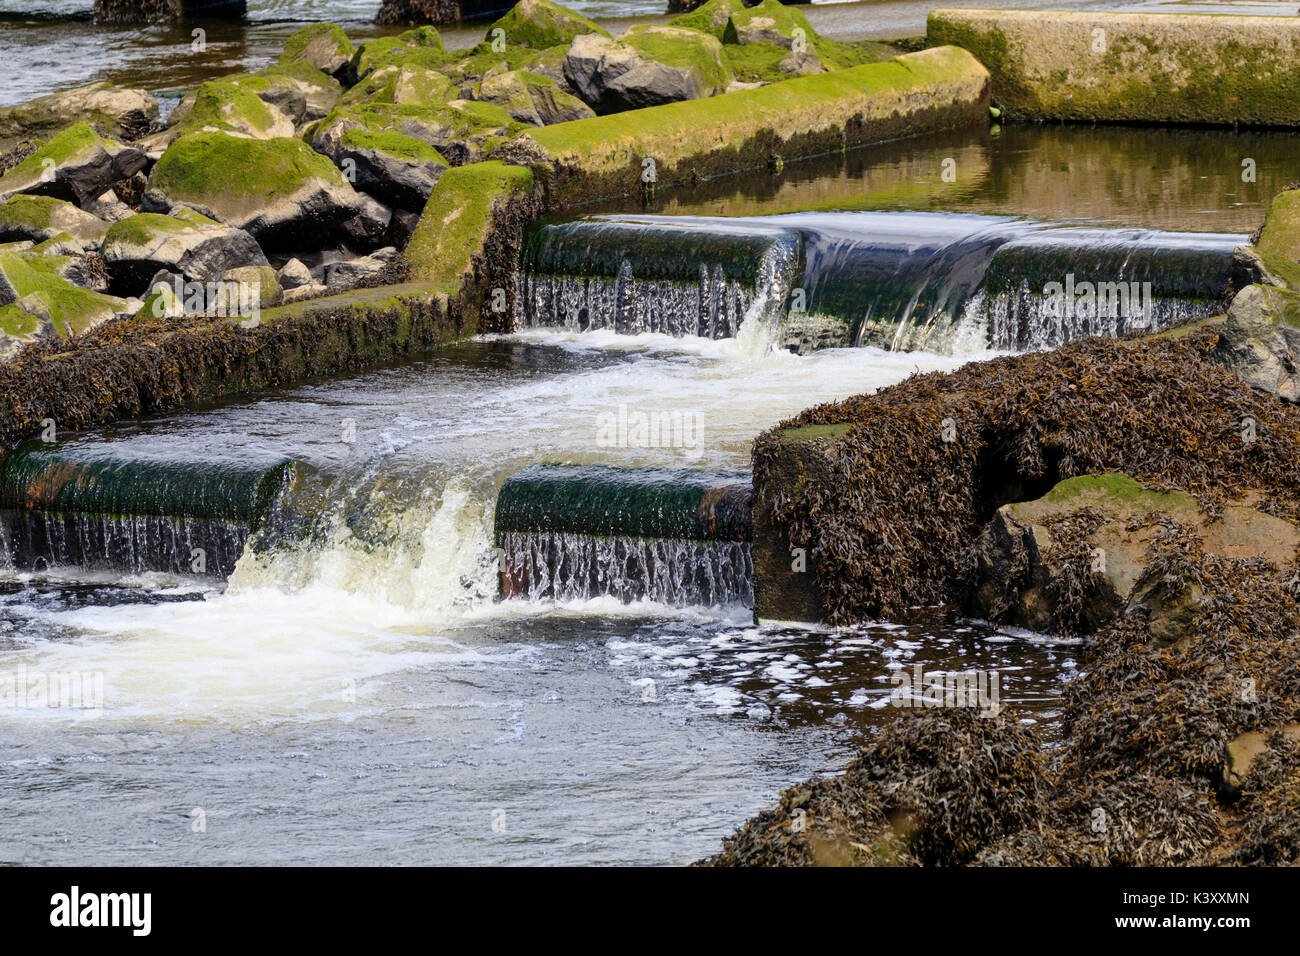 Lower part of the fish ladder at Lopwell dam on the River Tavy, Devon, UK Stock Photo